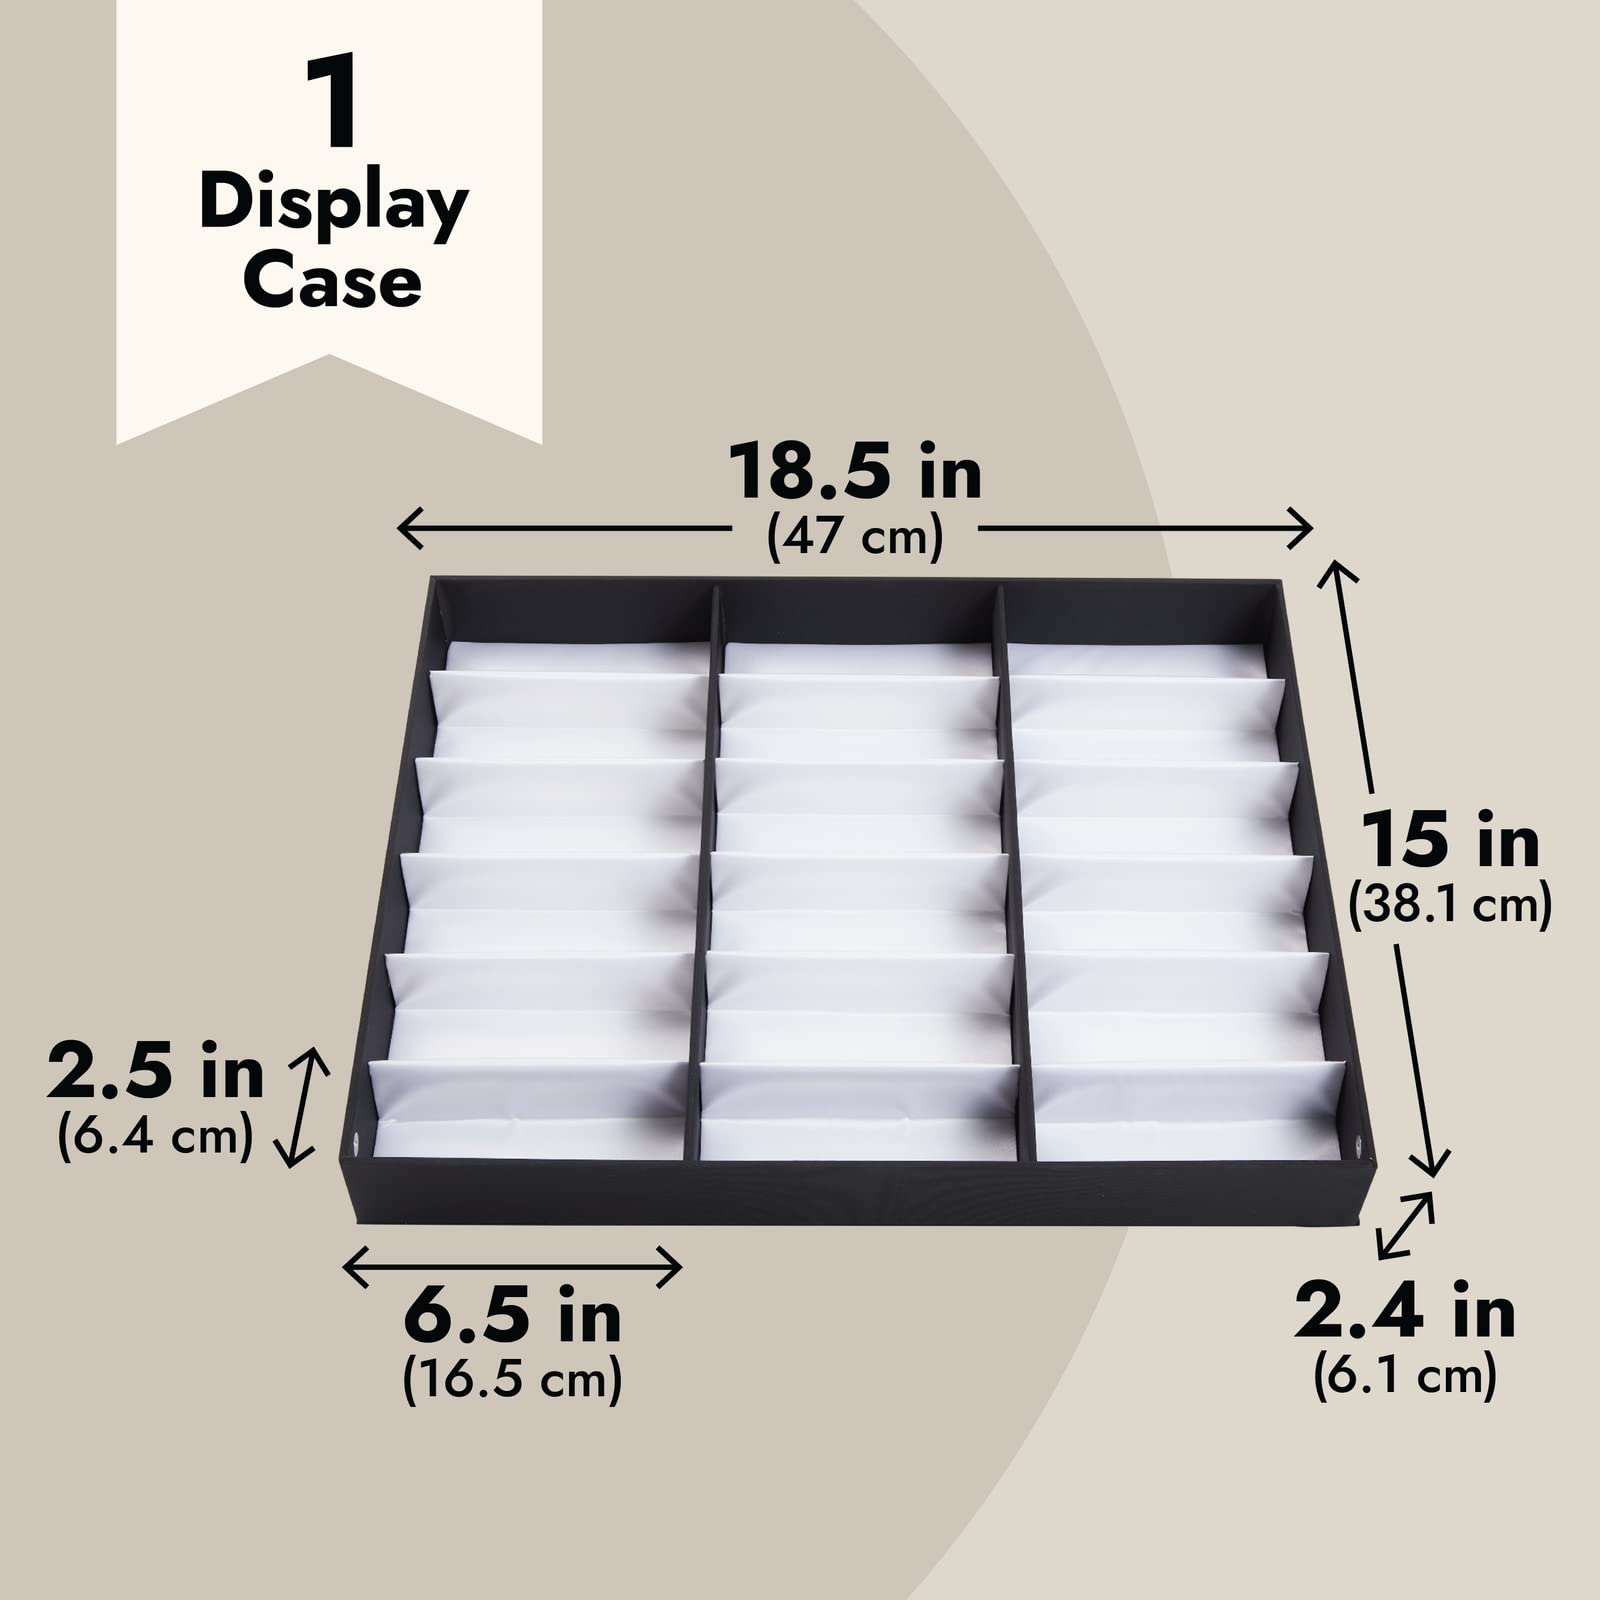 18 Sunglasses Glasses Retail Shop Display Stand Storage Box Tray Case Stand Hot Sale Case Tray Black Sunglasses Wear Display